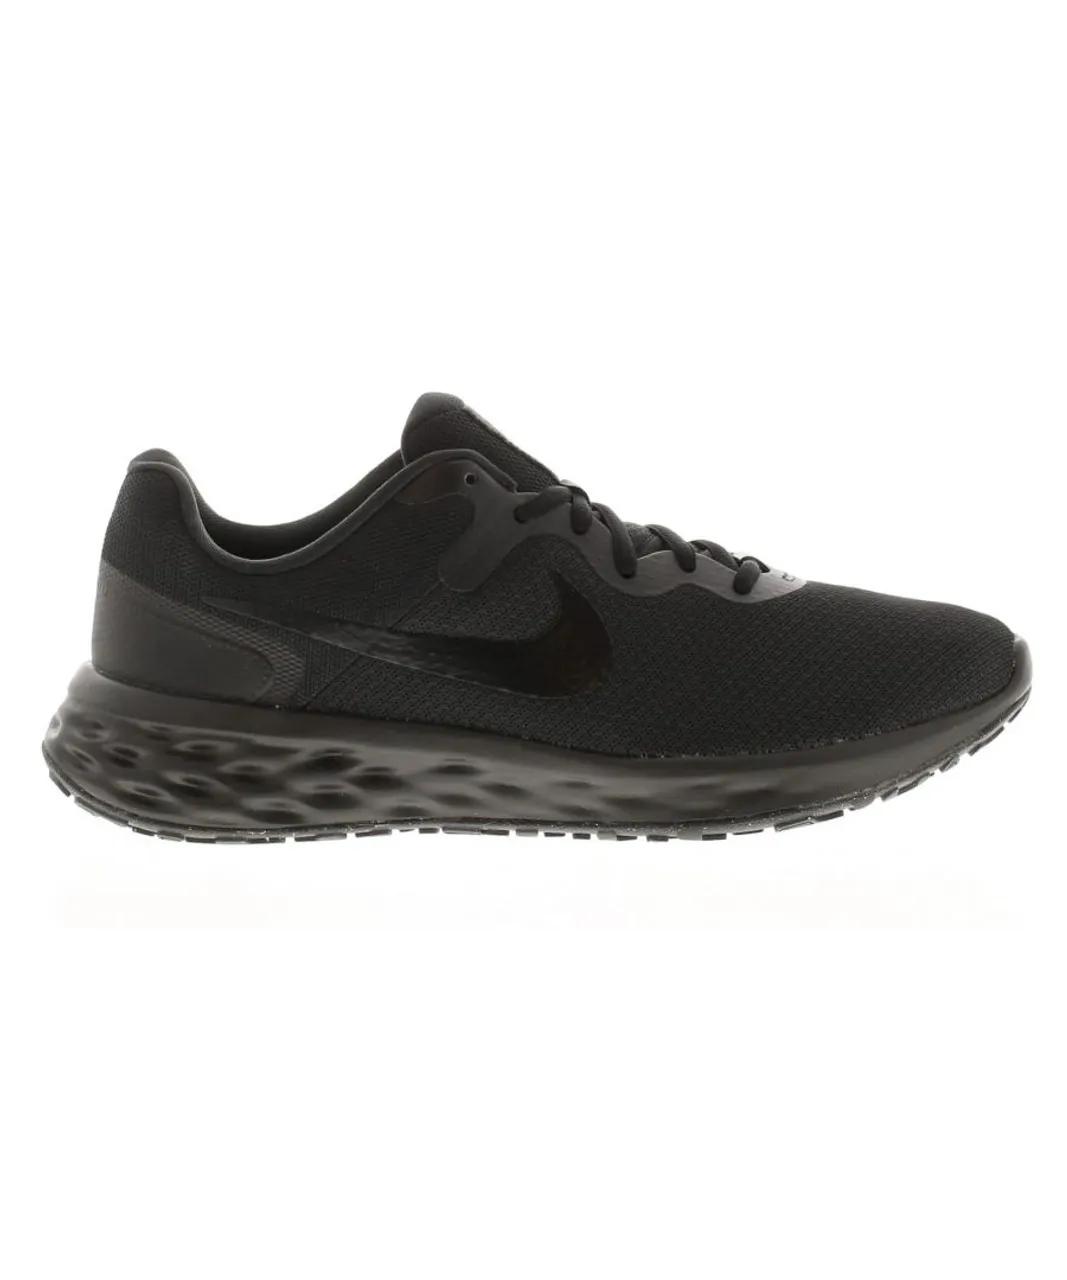 Nike Mens Running Trainers revolution 6 next na Lace Up black